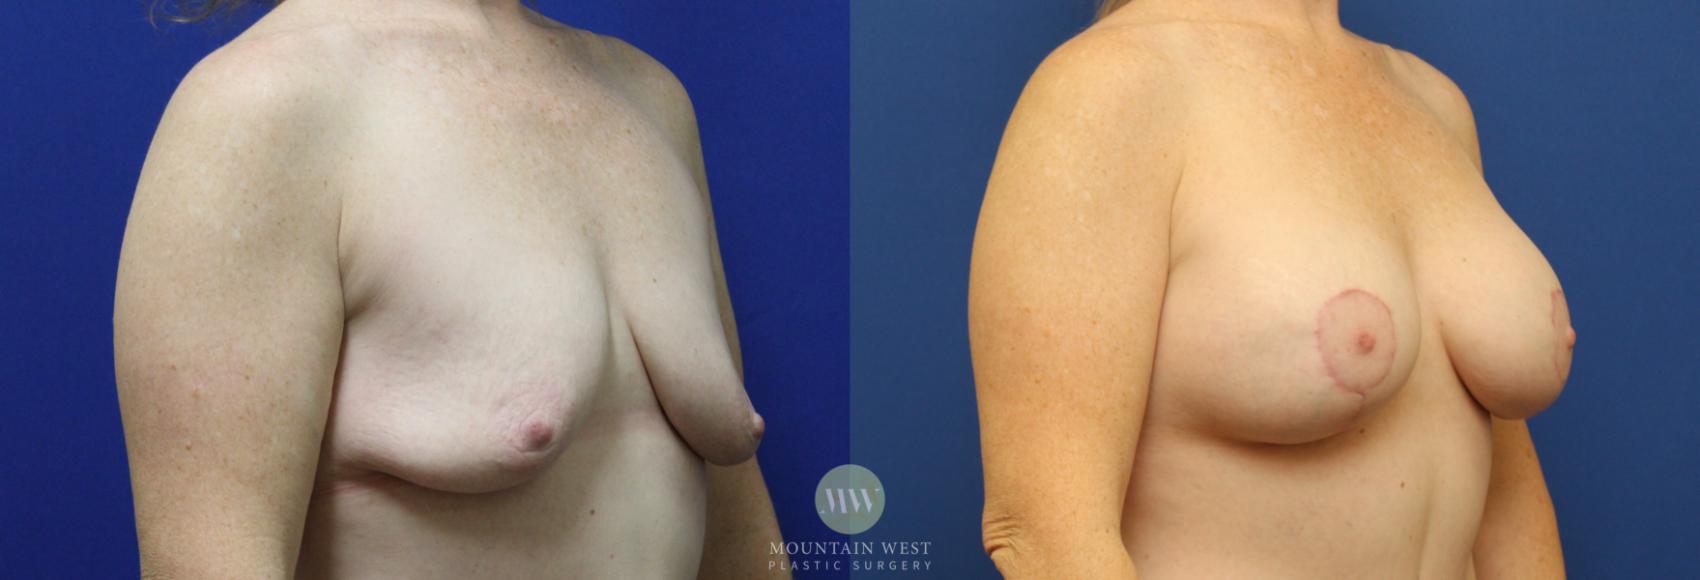 Breast Lift with Augmentation 